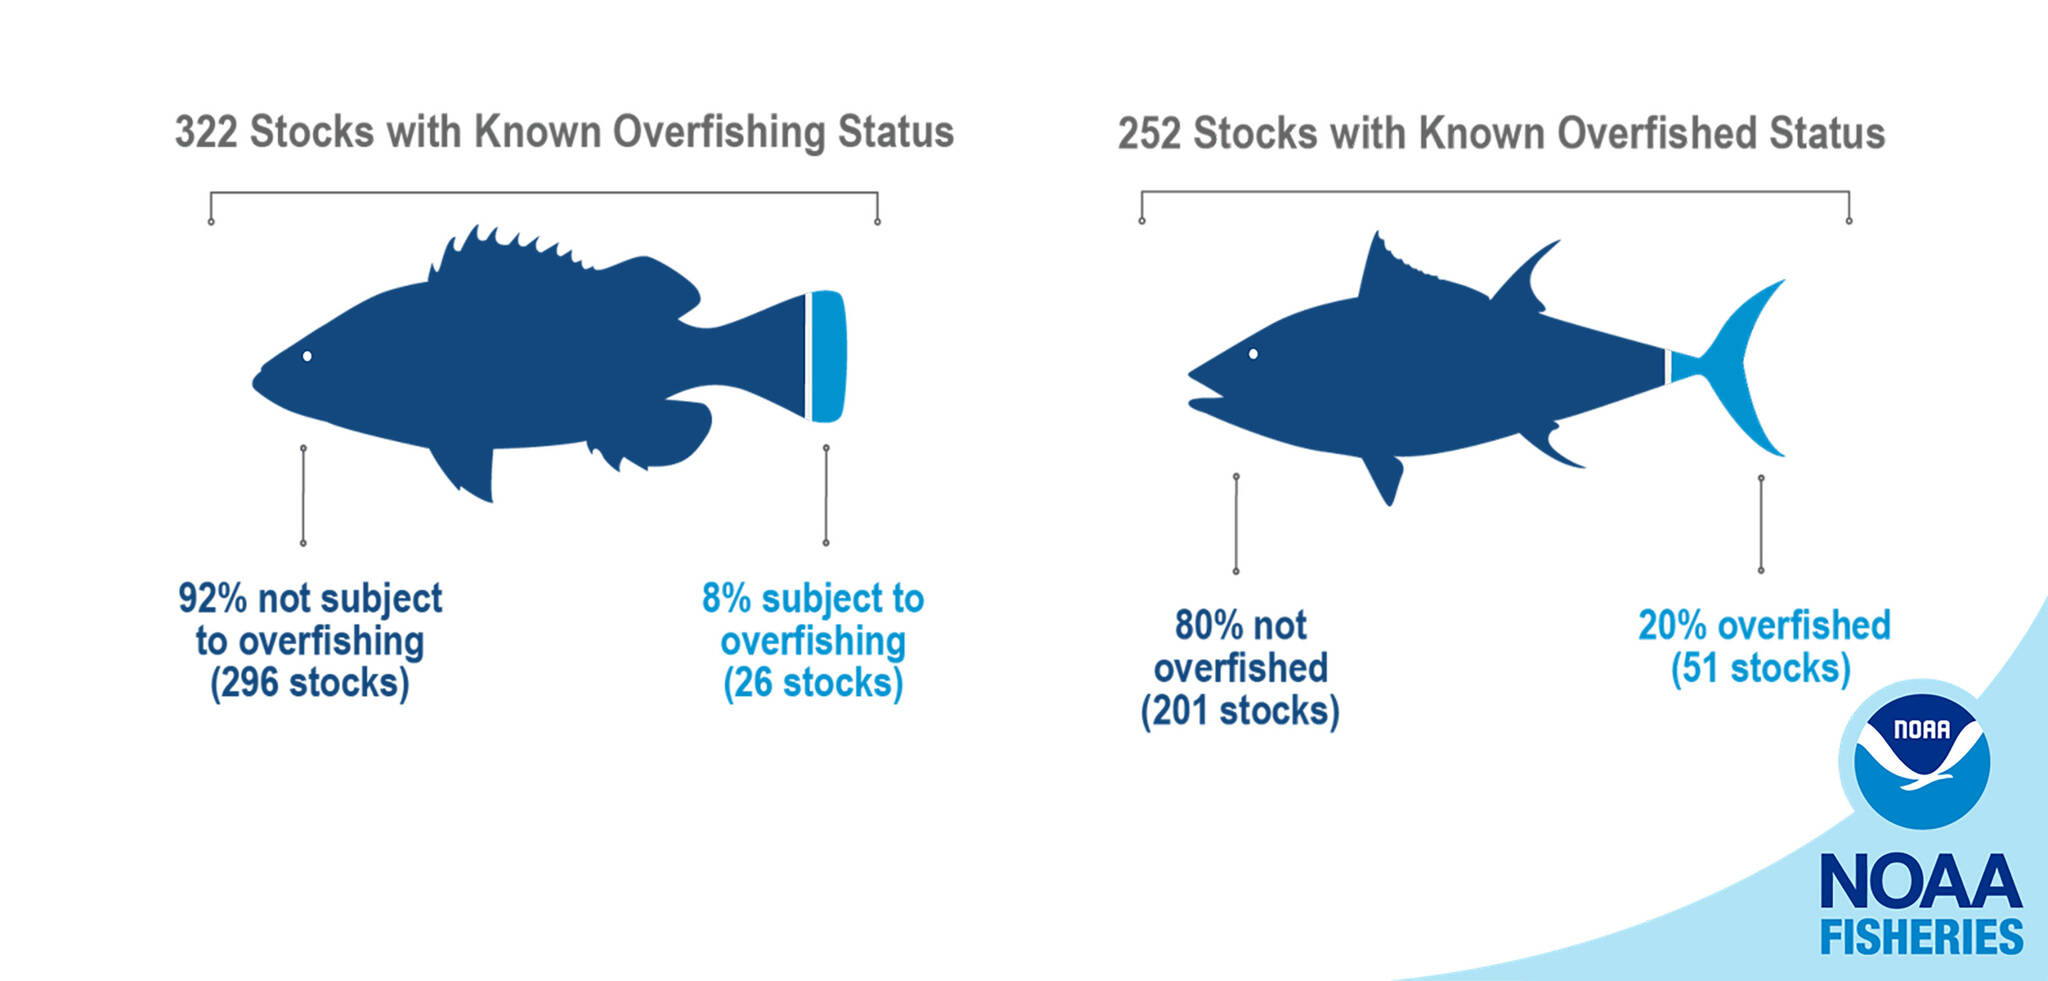 Of the more than 460 stocks managed by NOAA, 322 have a known overfishing status (296 not subject to overfishing and 26 subject to overfishing) and 252 have a known overfished status (201 not overfished and 51 overfished). (Courtesy Image / NOAA)